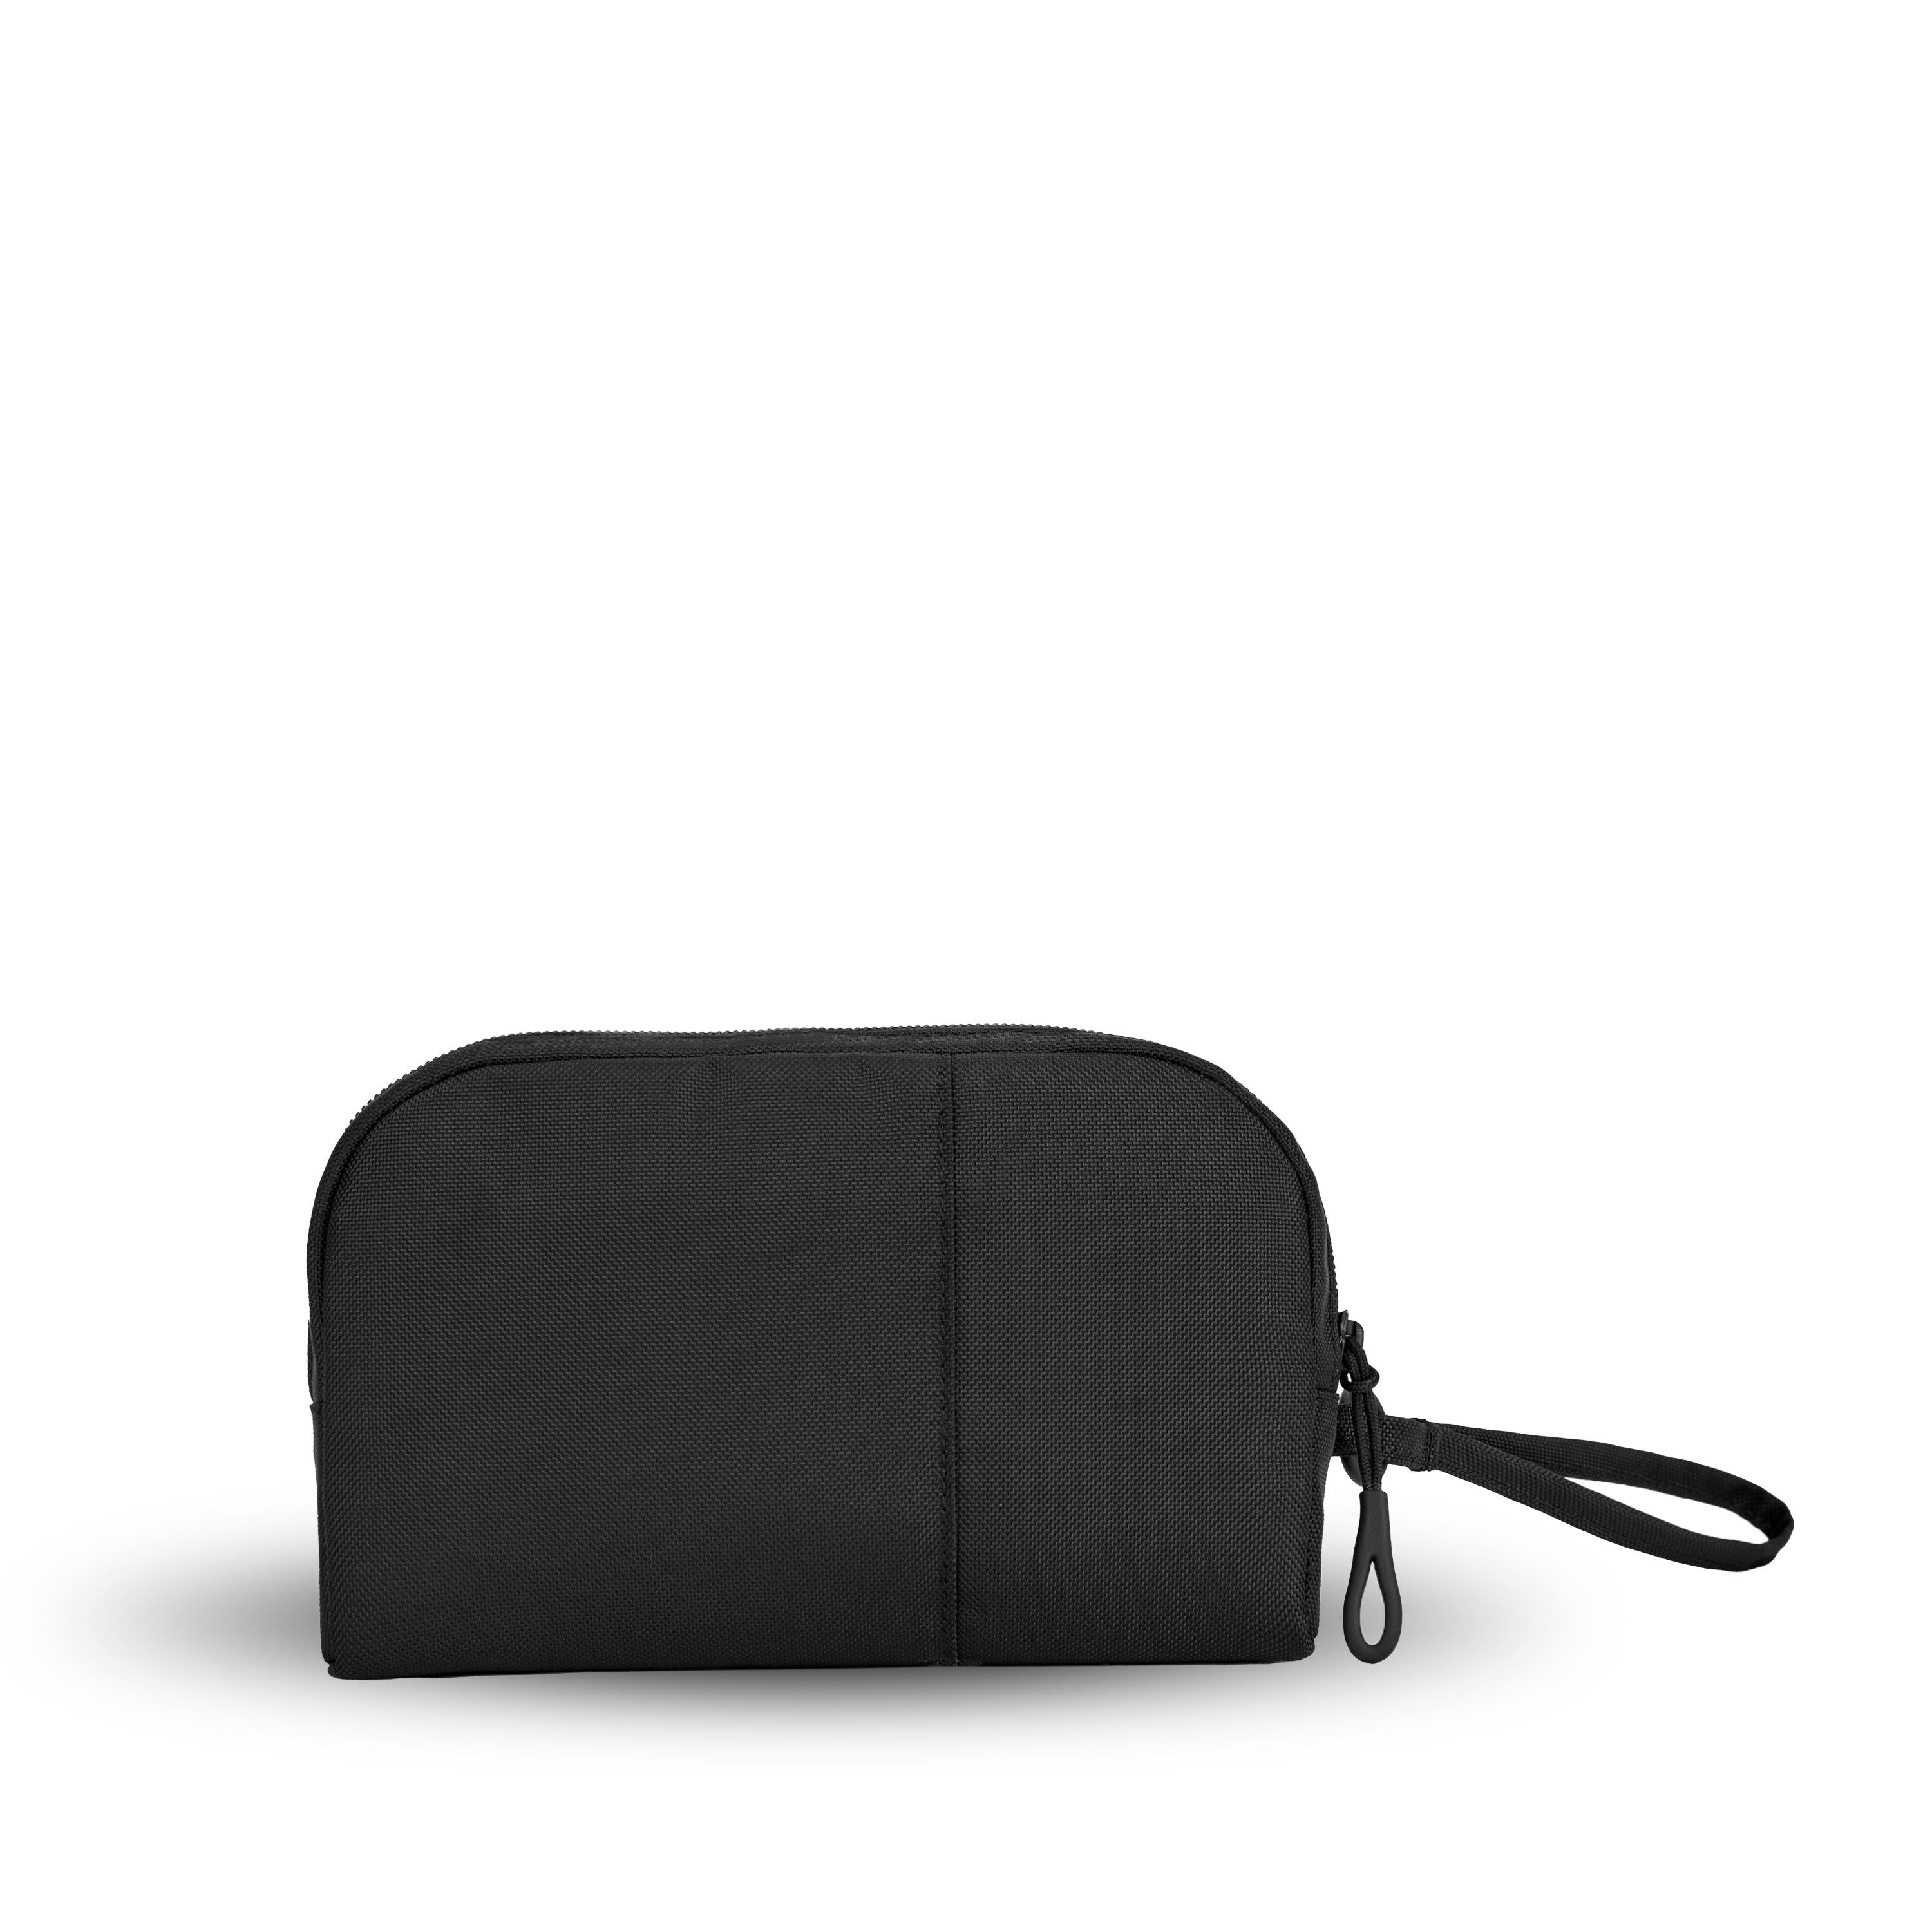 Back view of Sherpani travel accessory, the Jolie in Raven, in medium size. The pouch is entirely black. It features a black wristlet strap and an easy-pull zipper accented in black.